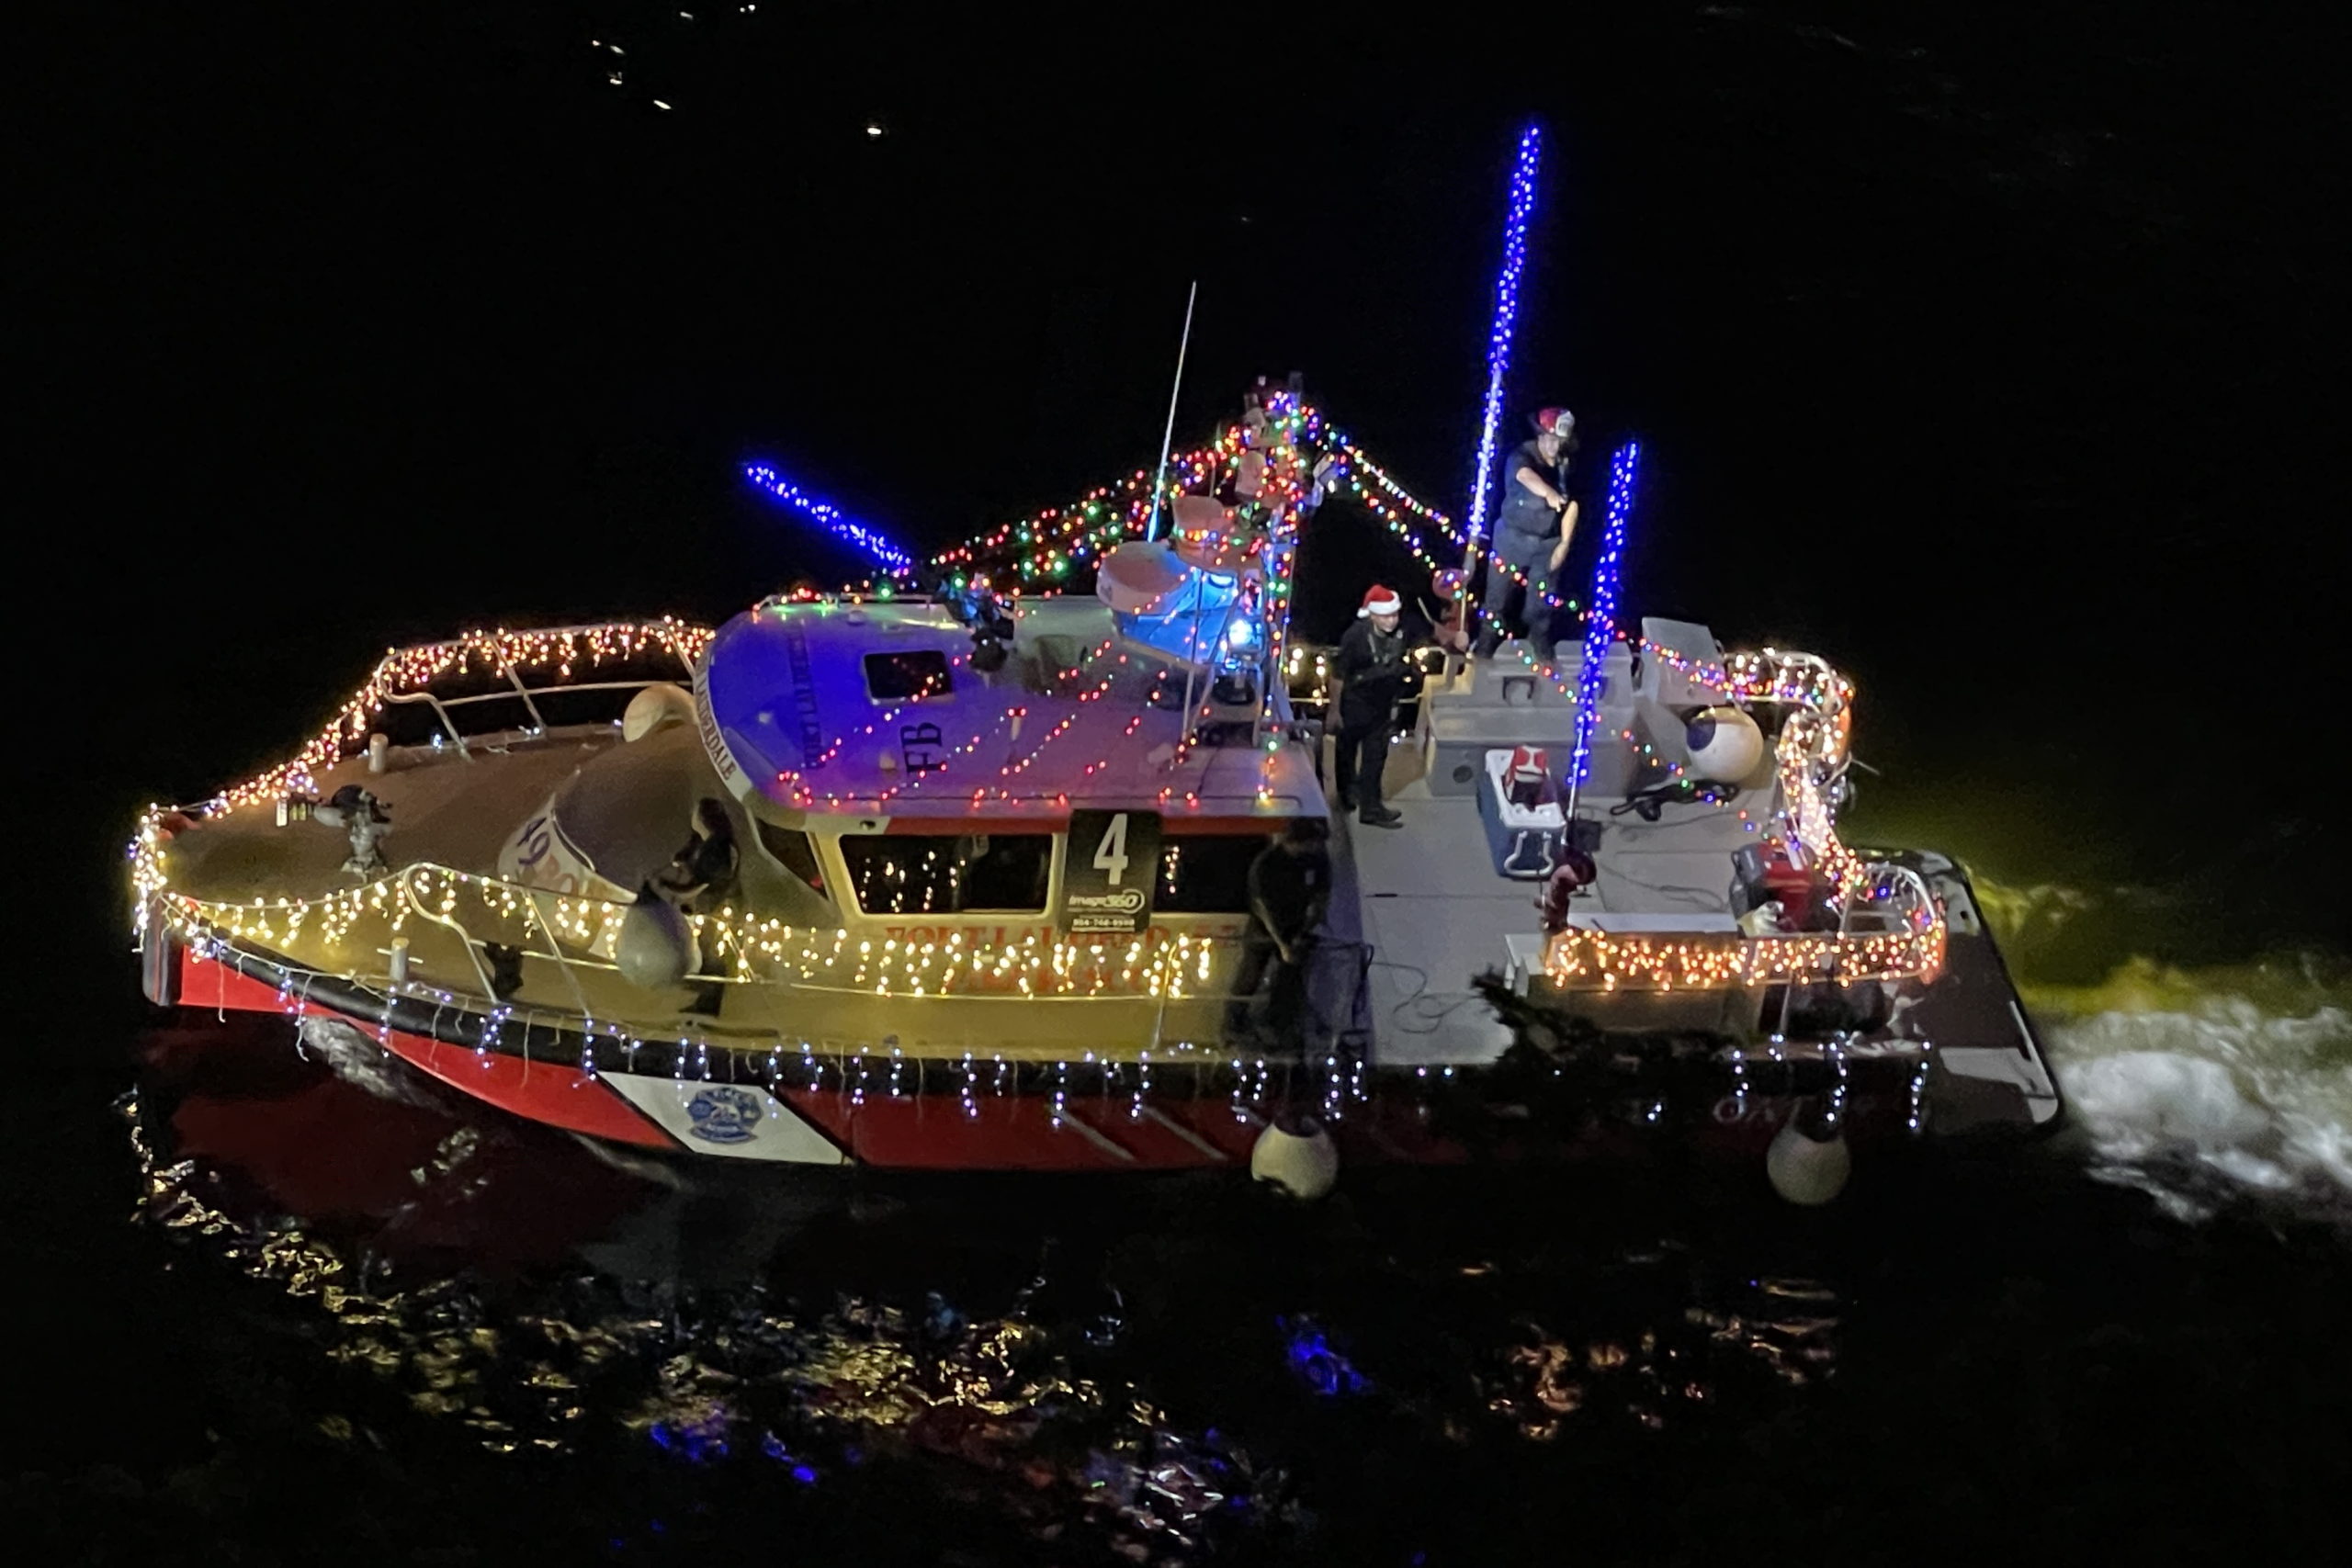 Fort Lauderdale Fire Boat 49, boat number 4 in the 2022 Winterfest Boat Parade